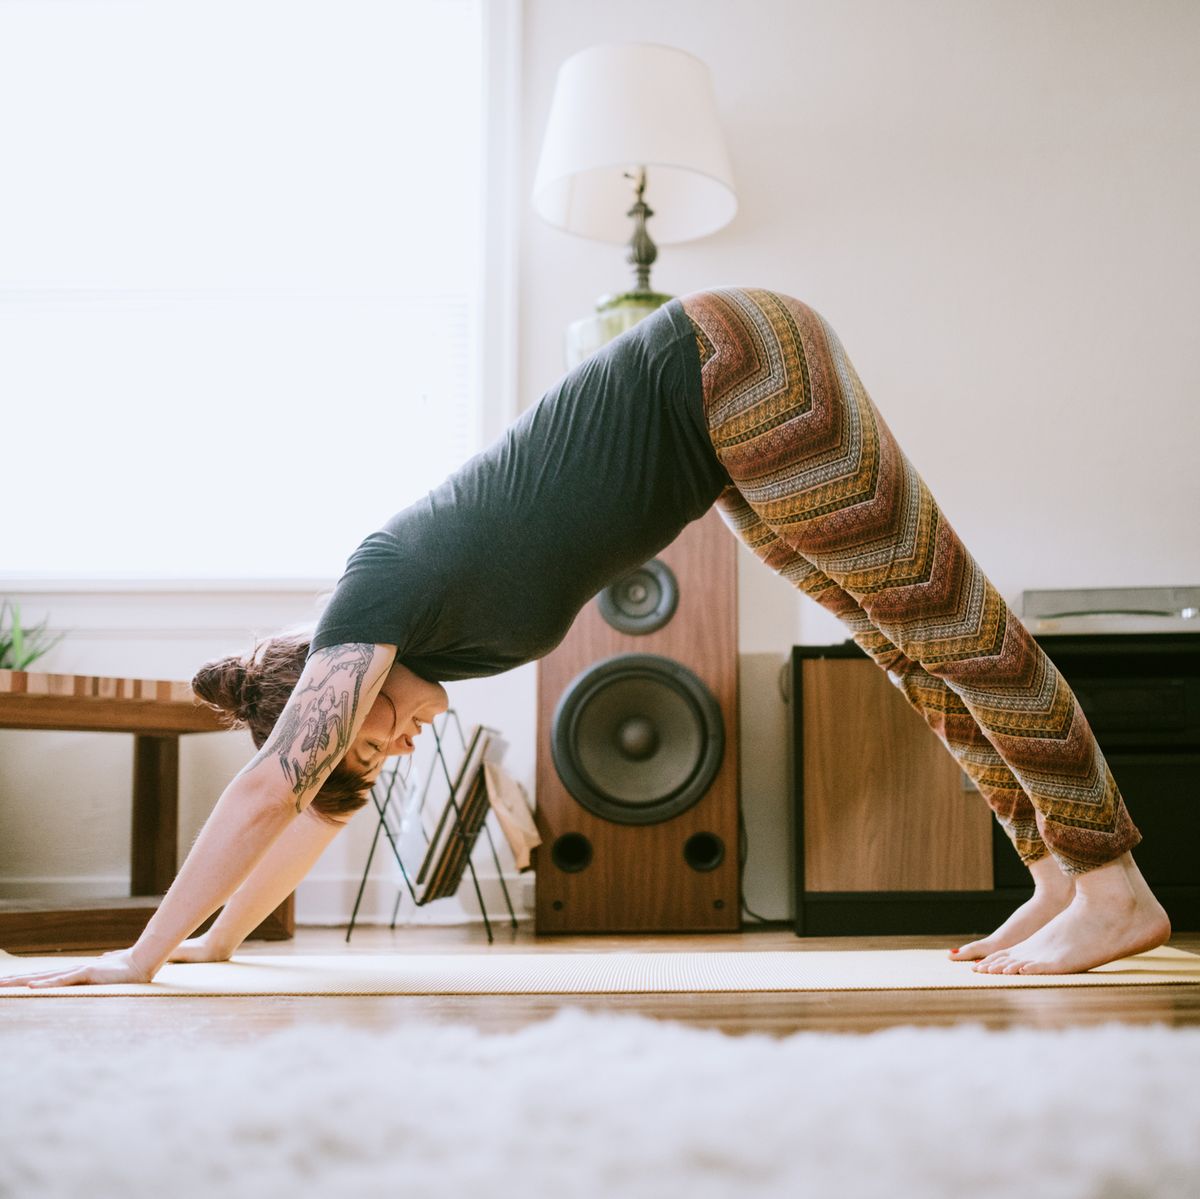 Young Adult Woman At Home Practicing Yoga